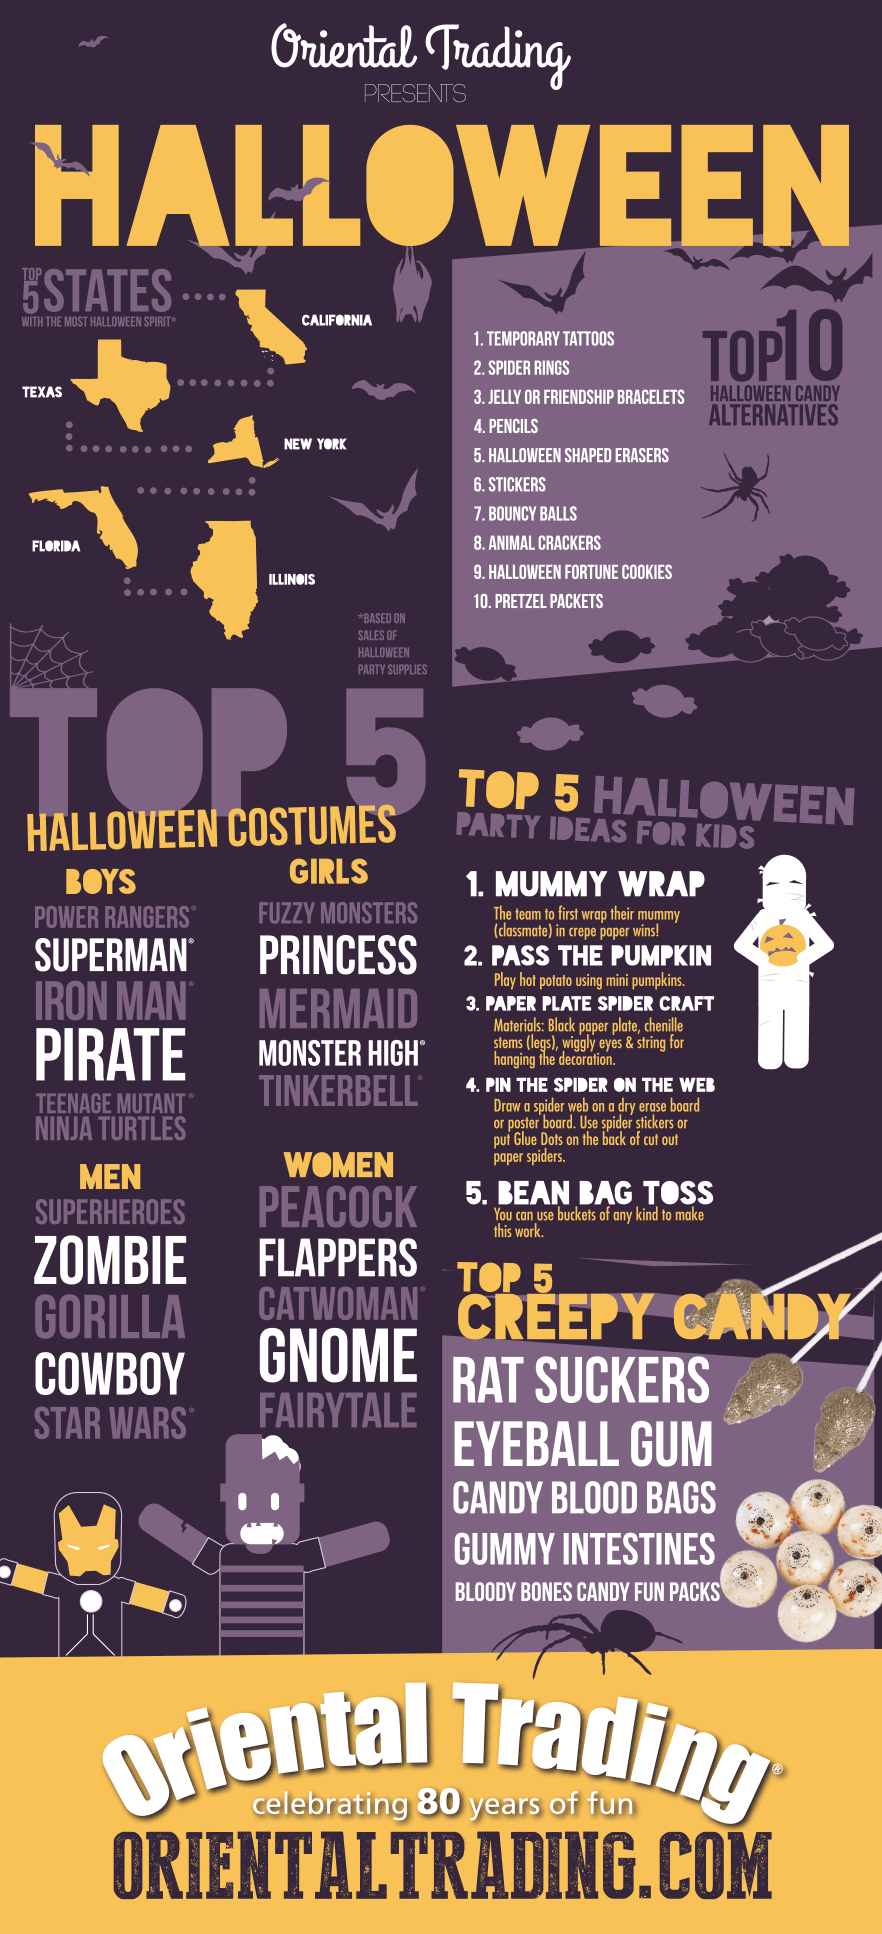 Halloween Fun Facts & Ghoulishly Good Ideas by OrientalTrading.com